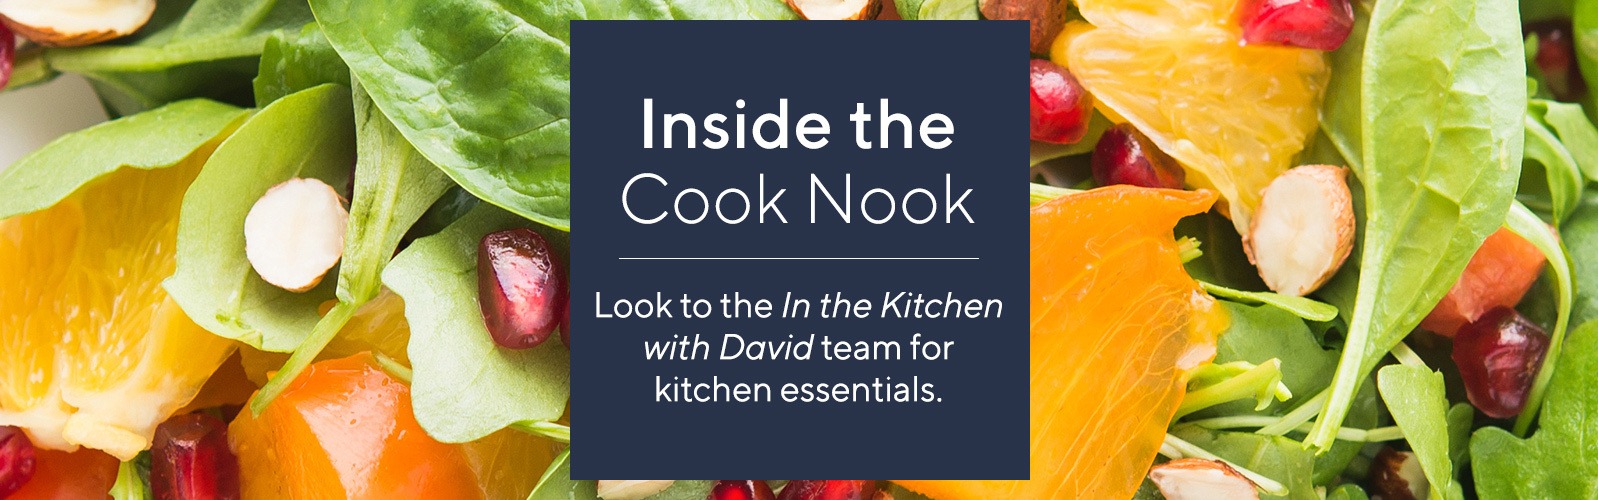 Inside the Cook Nook  Look to the In the Kitchen with David team for kitchen essentials.